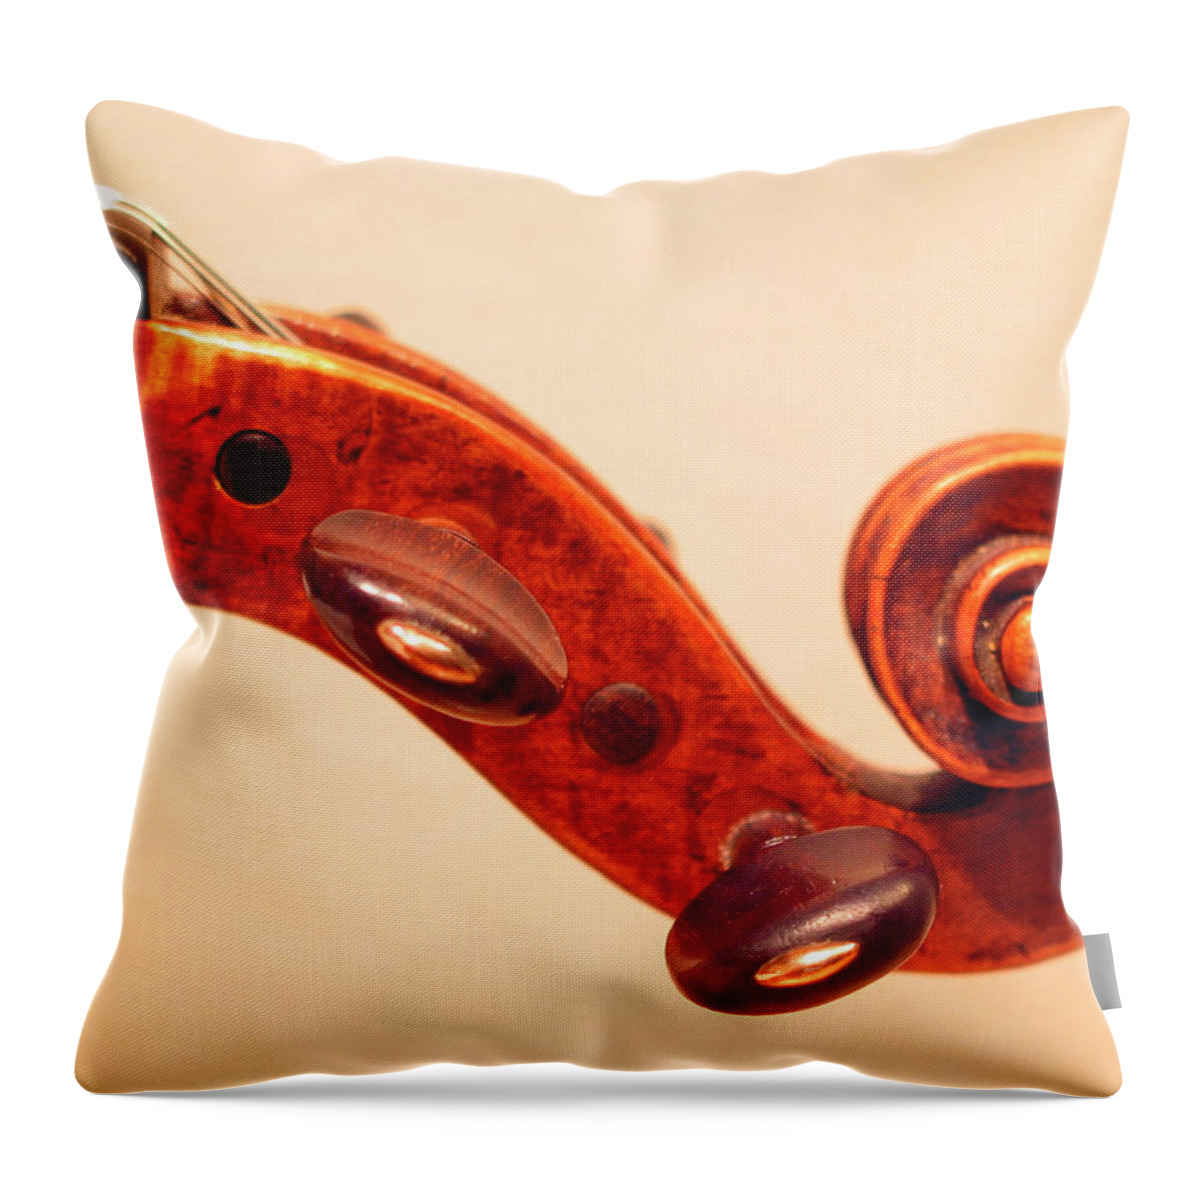 Curve Throw Pillow featuring the photograph Violin by Vhsrt-just